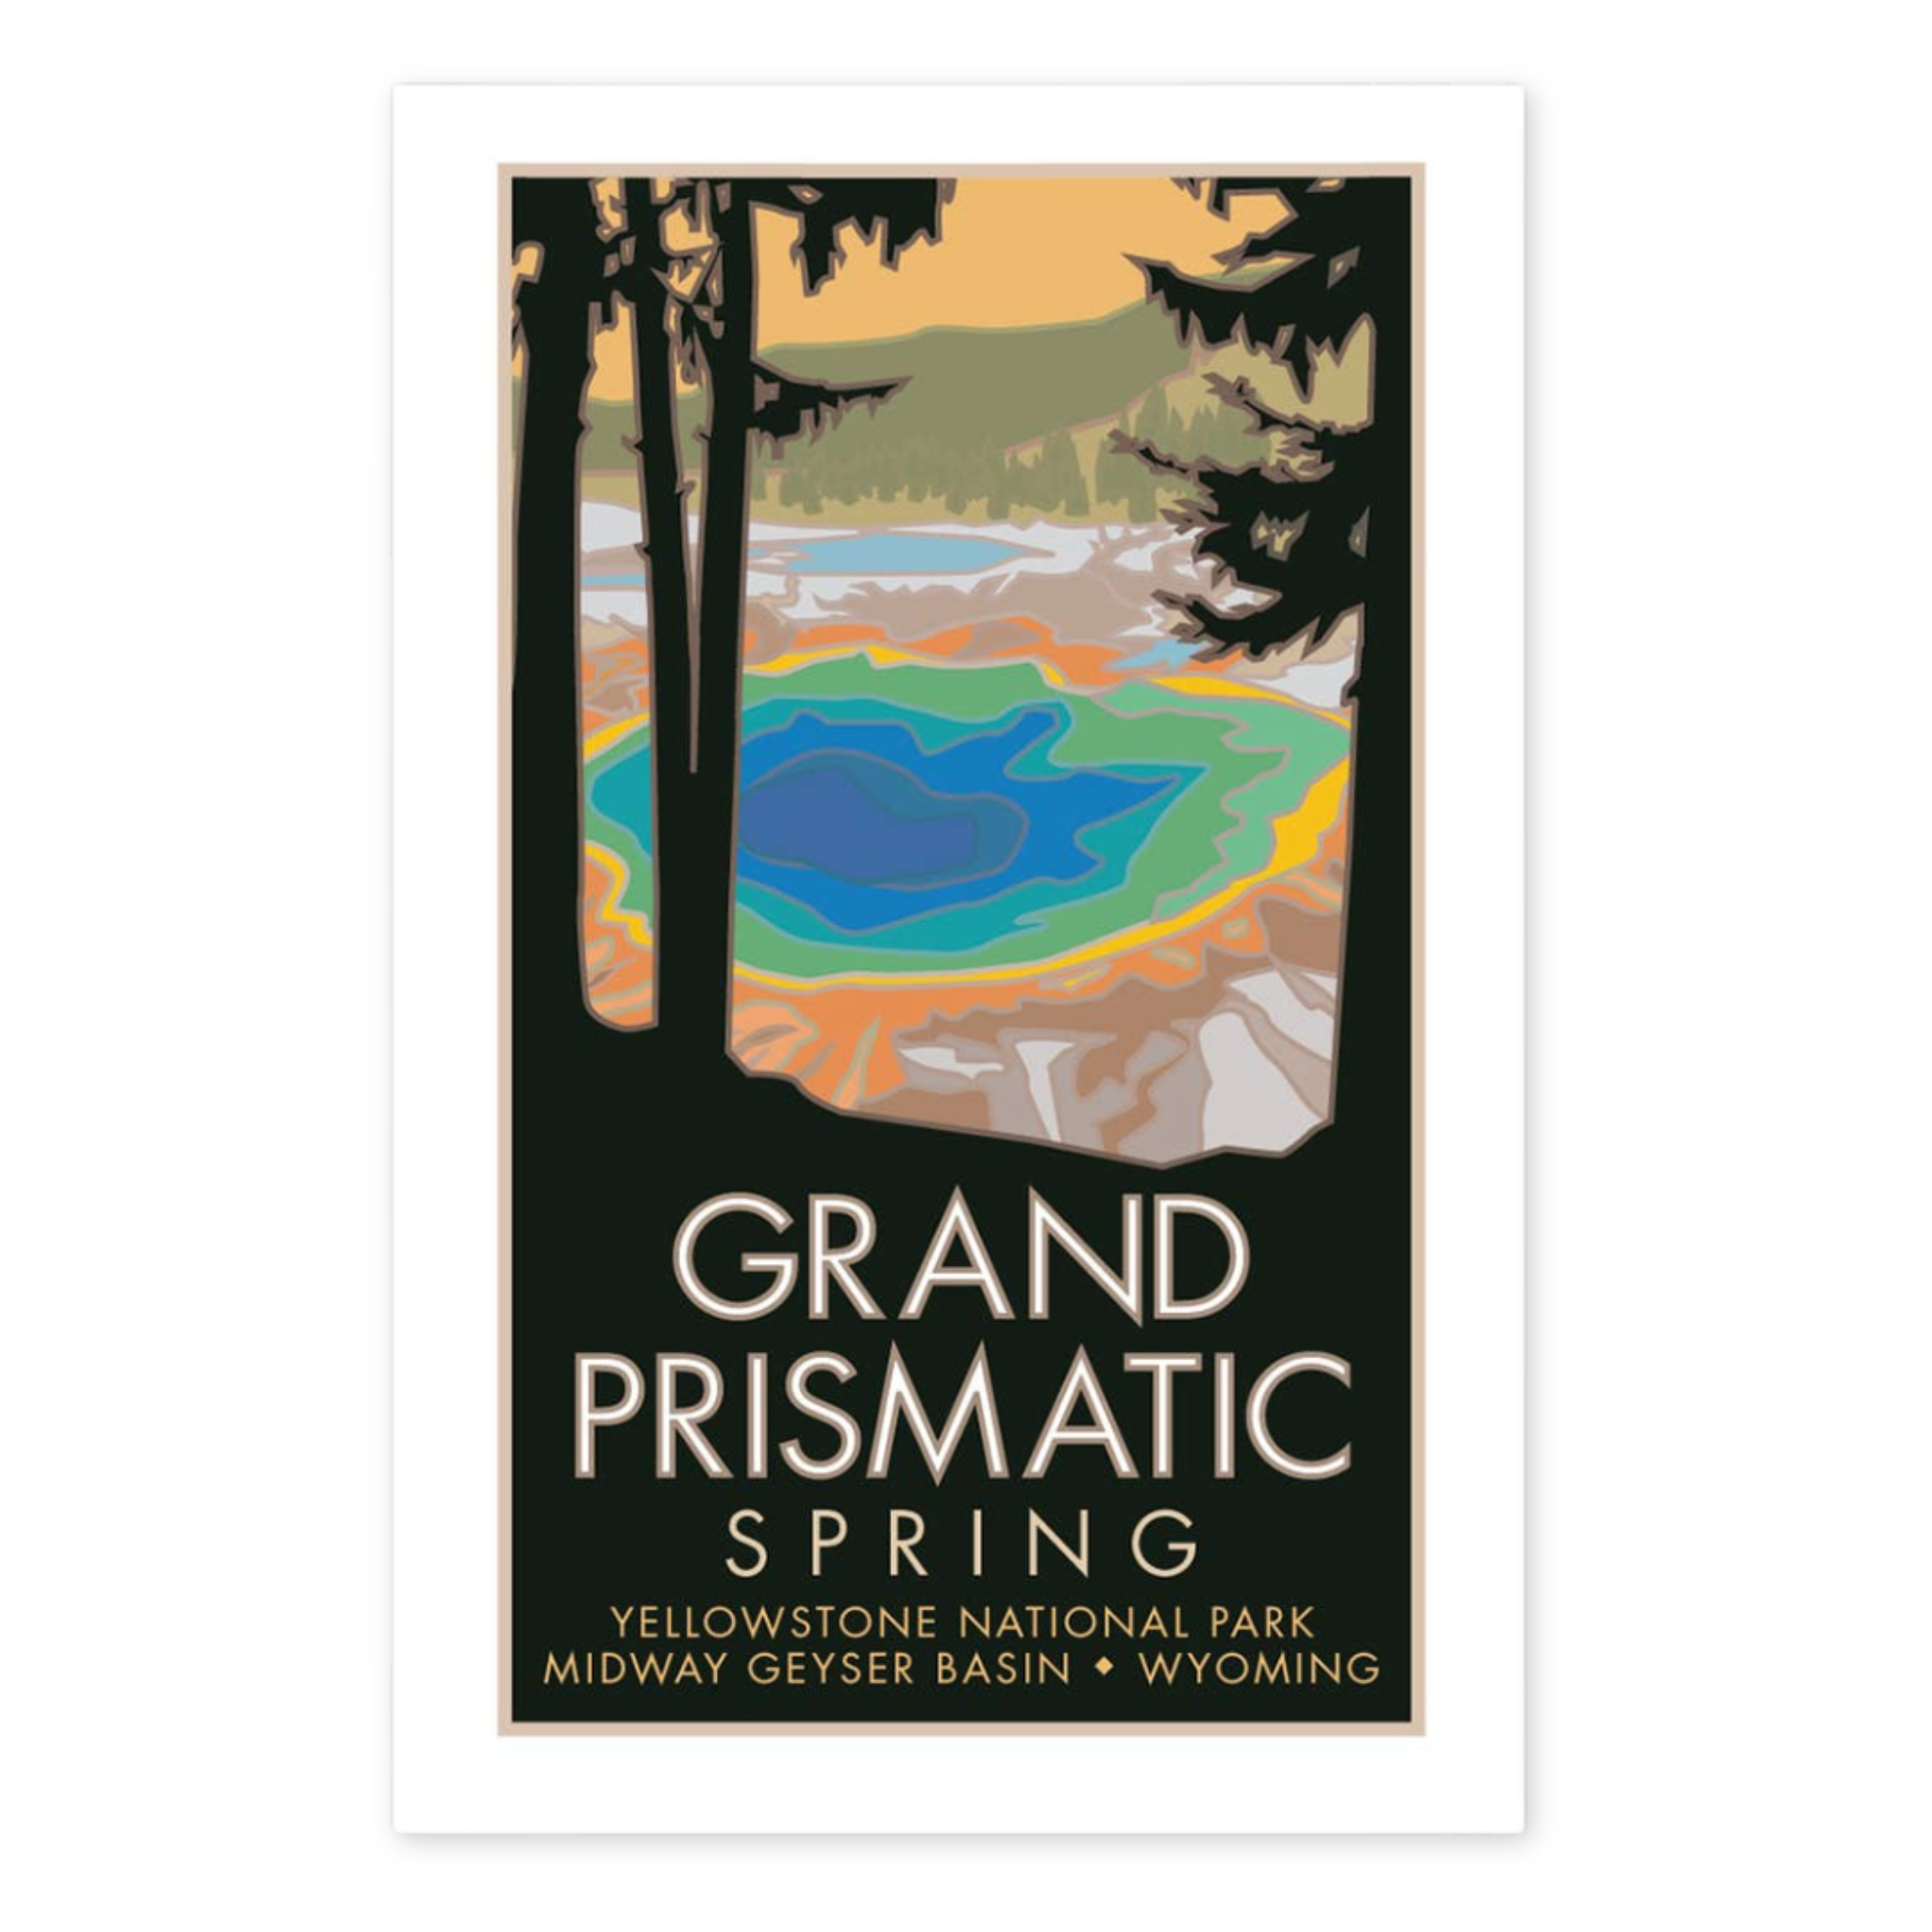 poster with an image of a hot spring and grand prismatic spring yellowstone national park midway geyser basin wyoming printed on the bottom